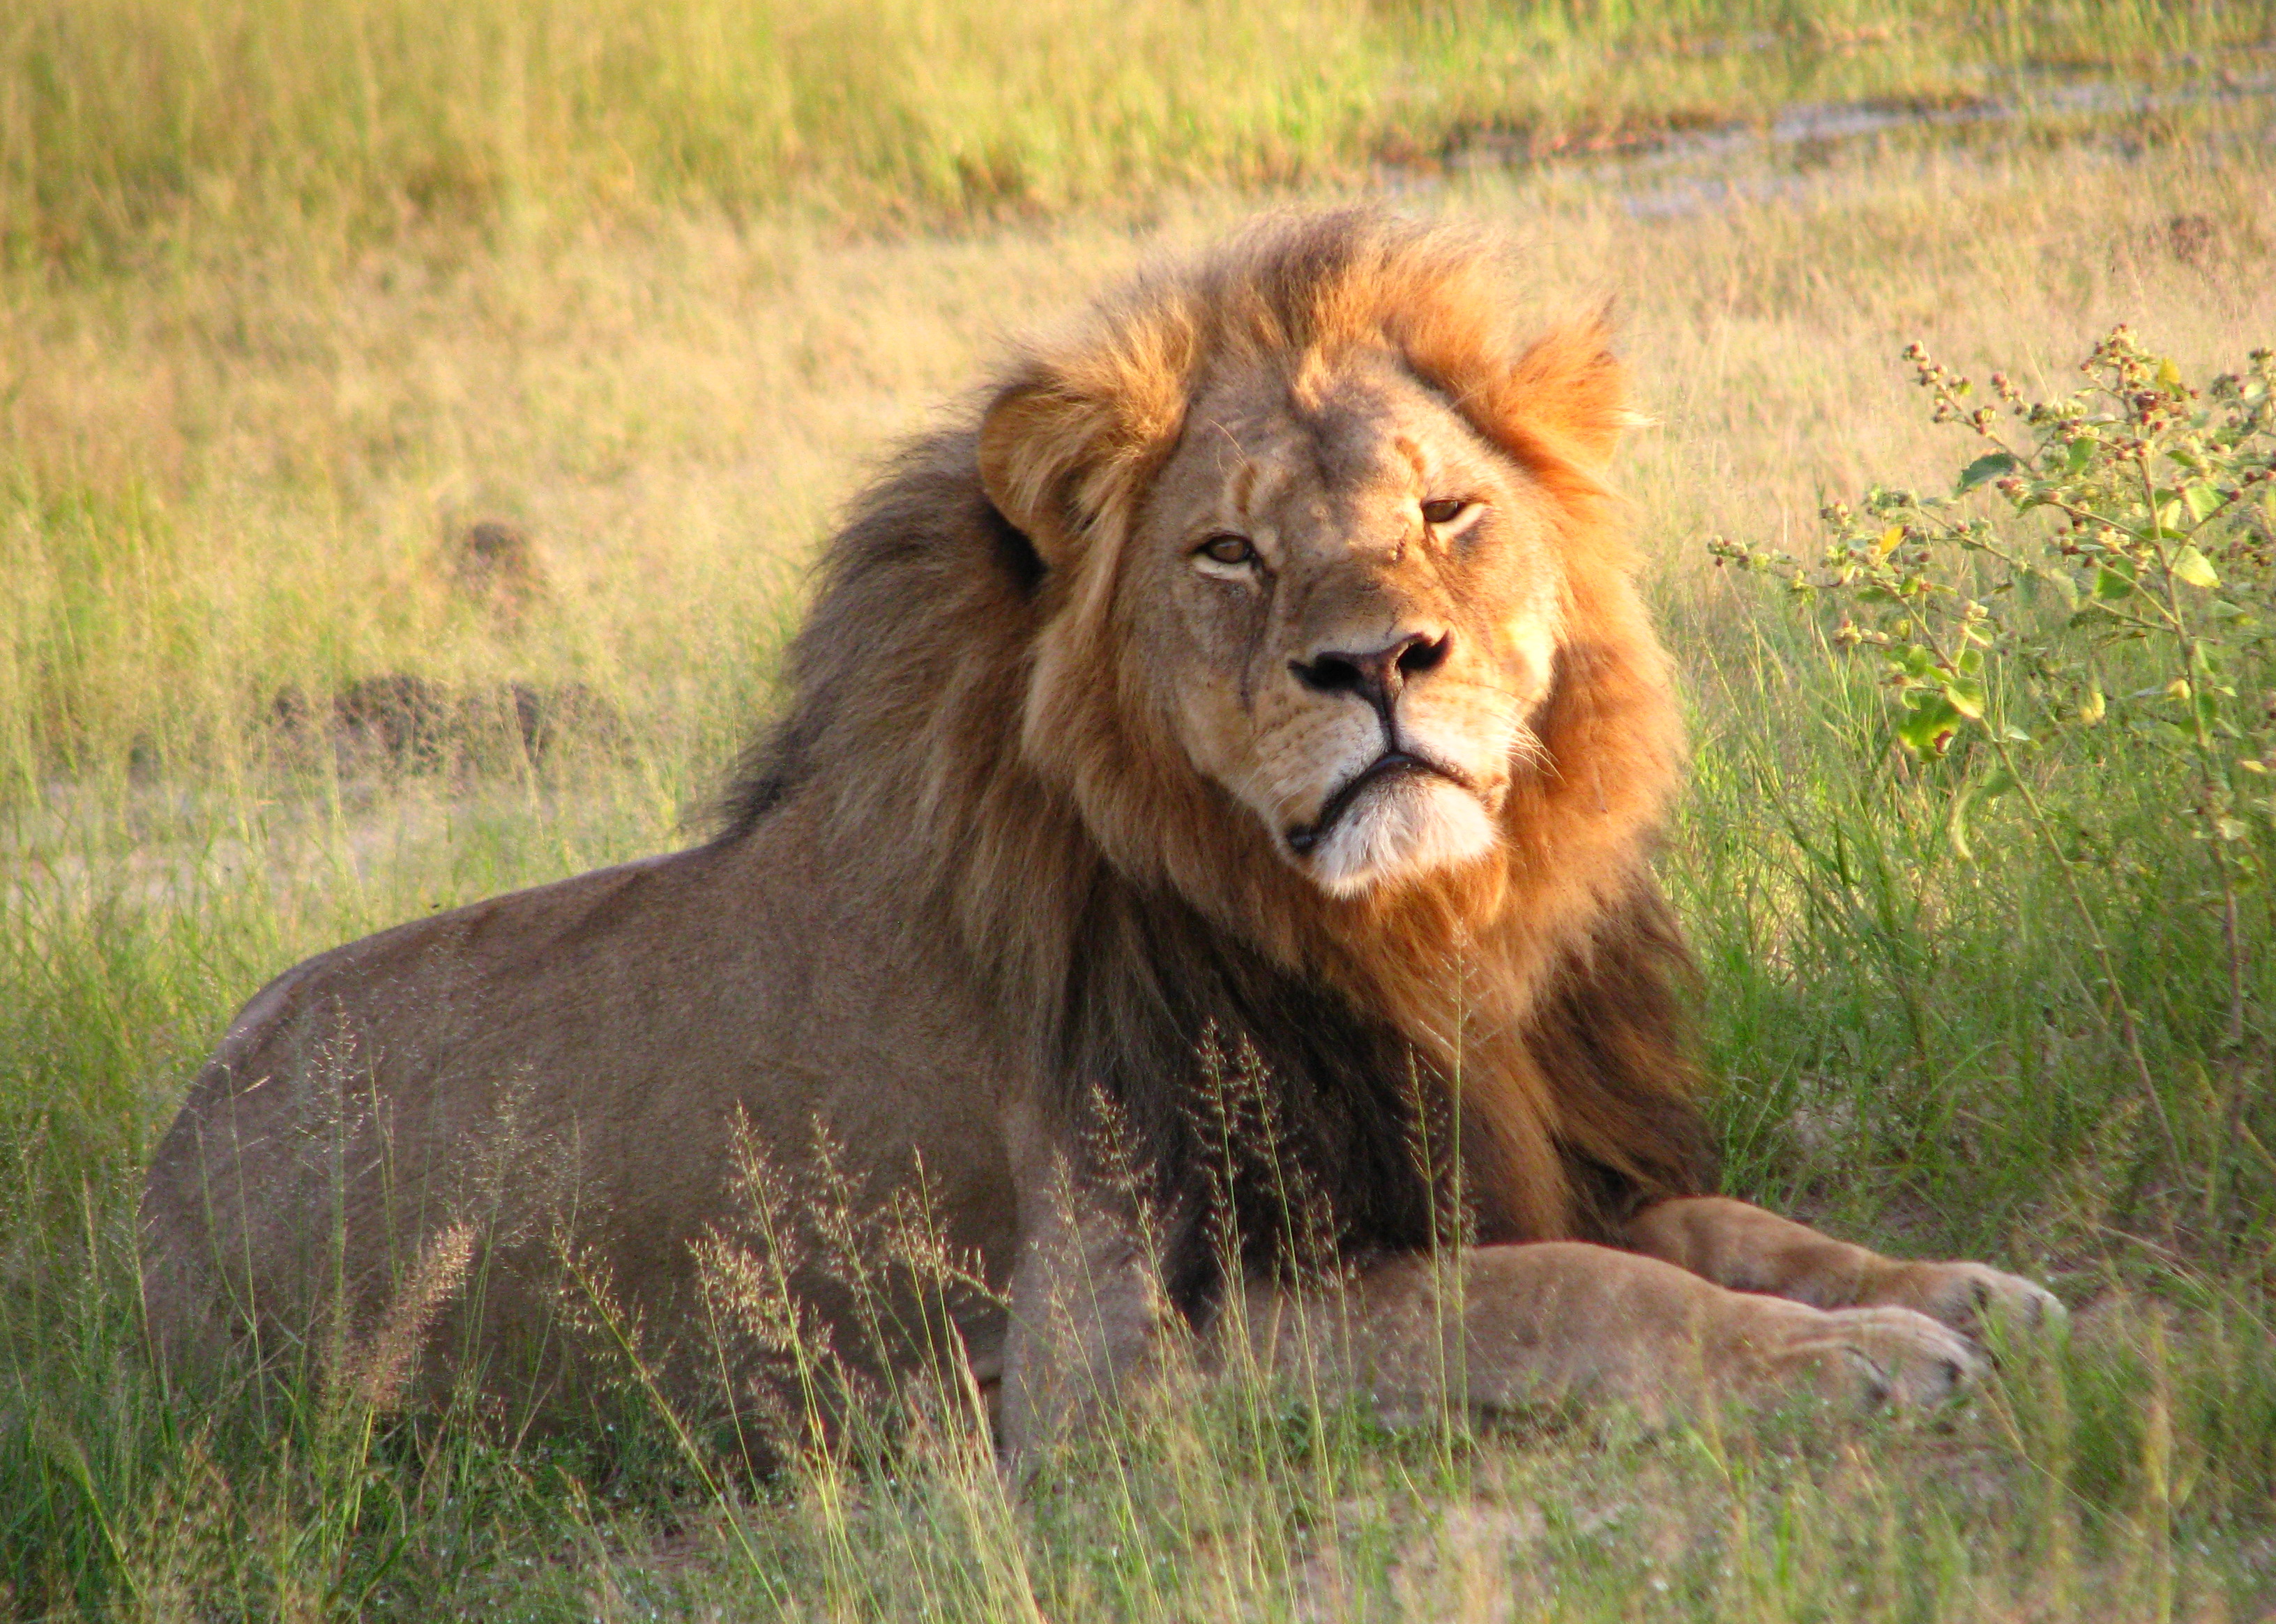 Cecil_the_lion_at_Hwange_National_Park_(4516560206)